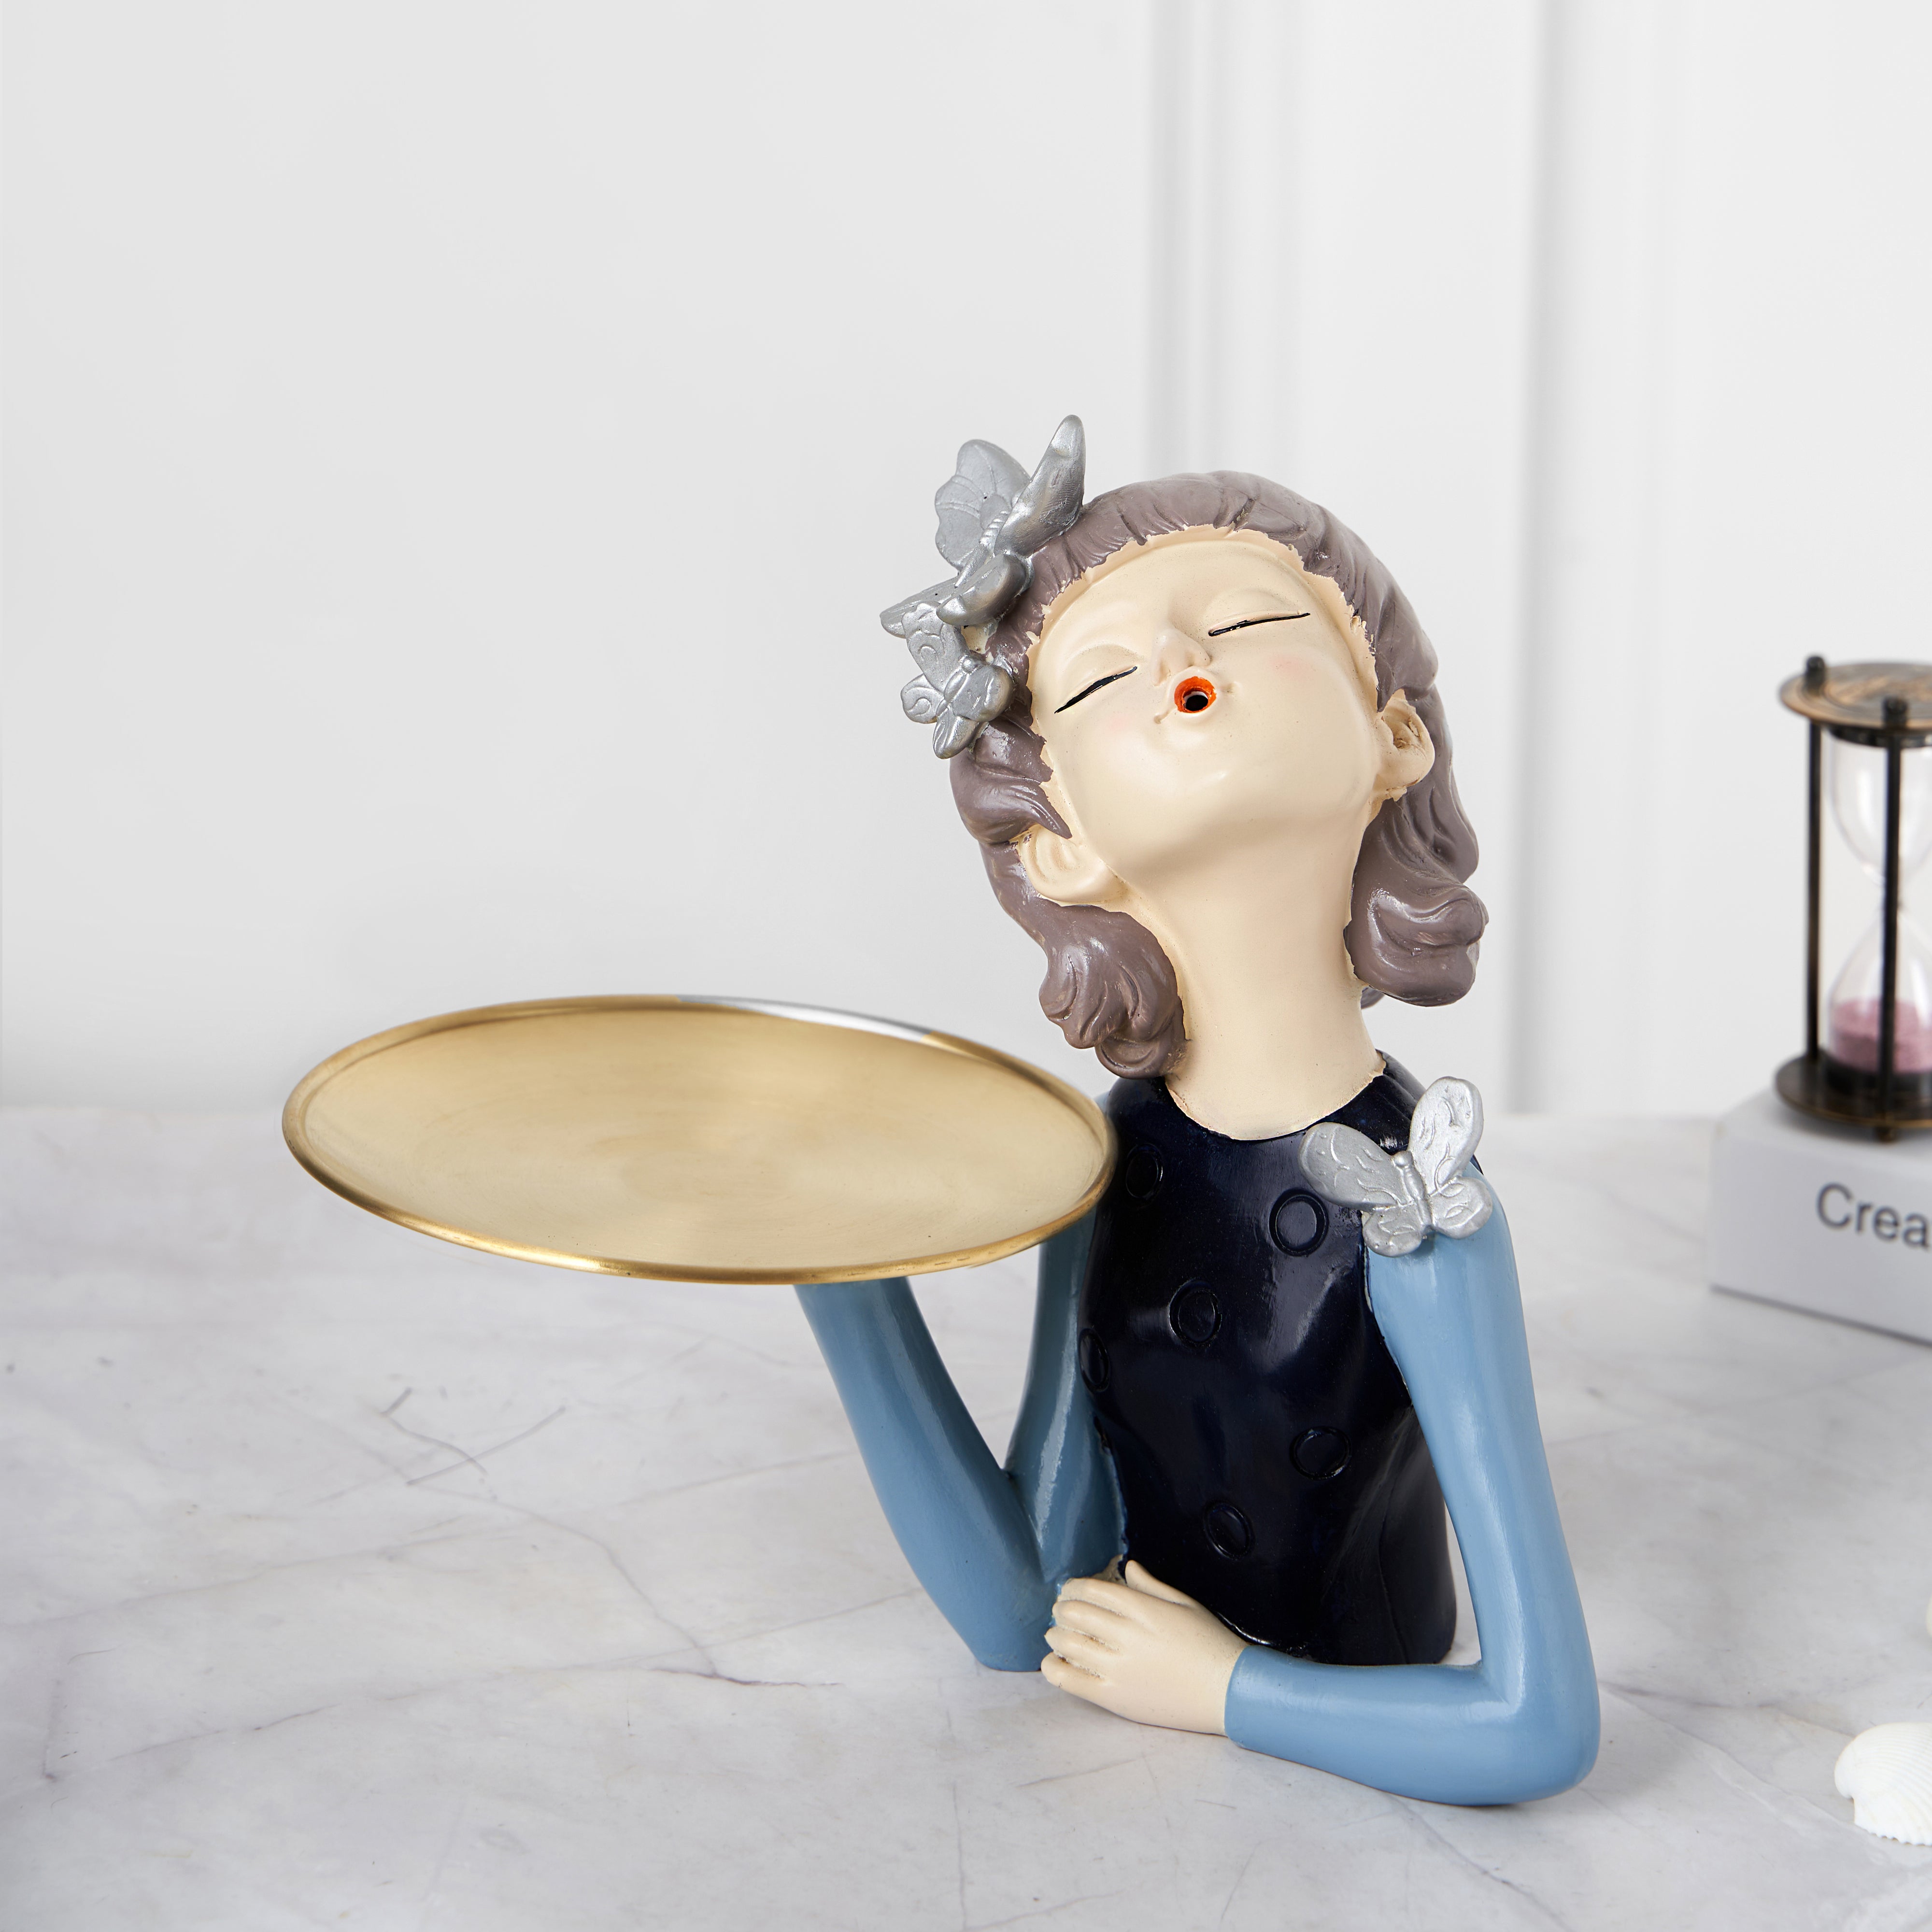 Nordic Lady Figurine With Plate Sculpture Figurines for Home Decor